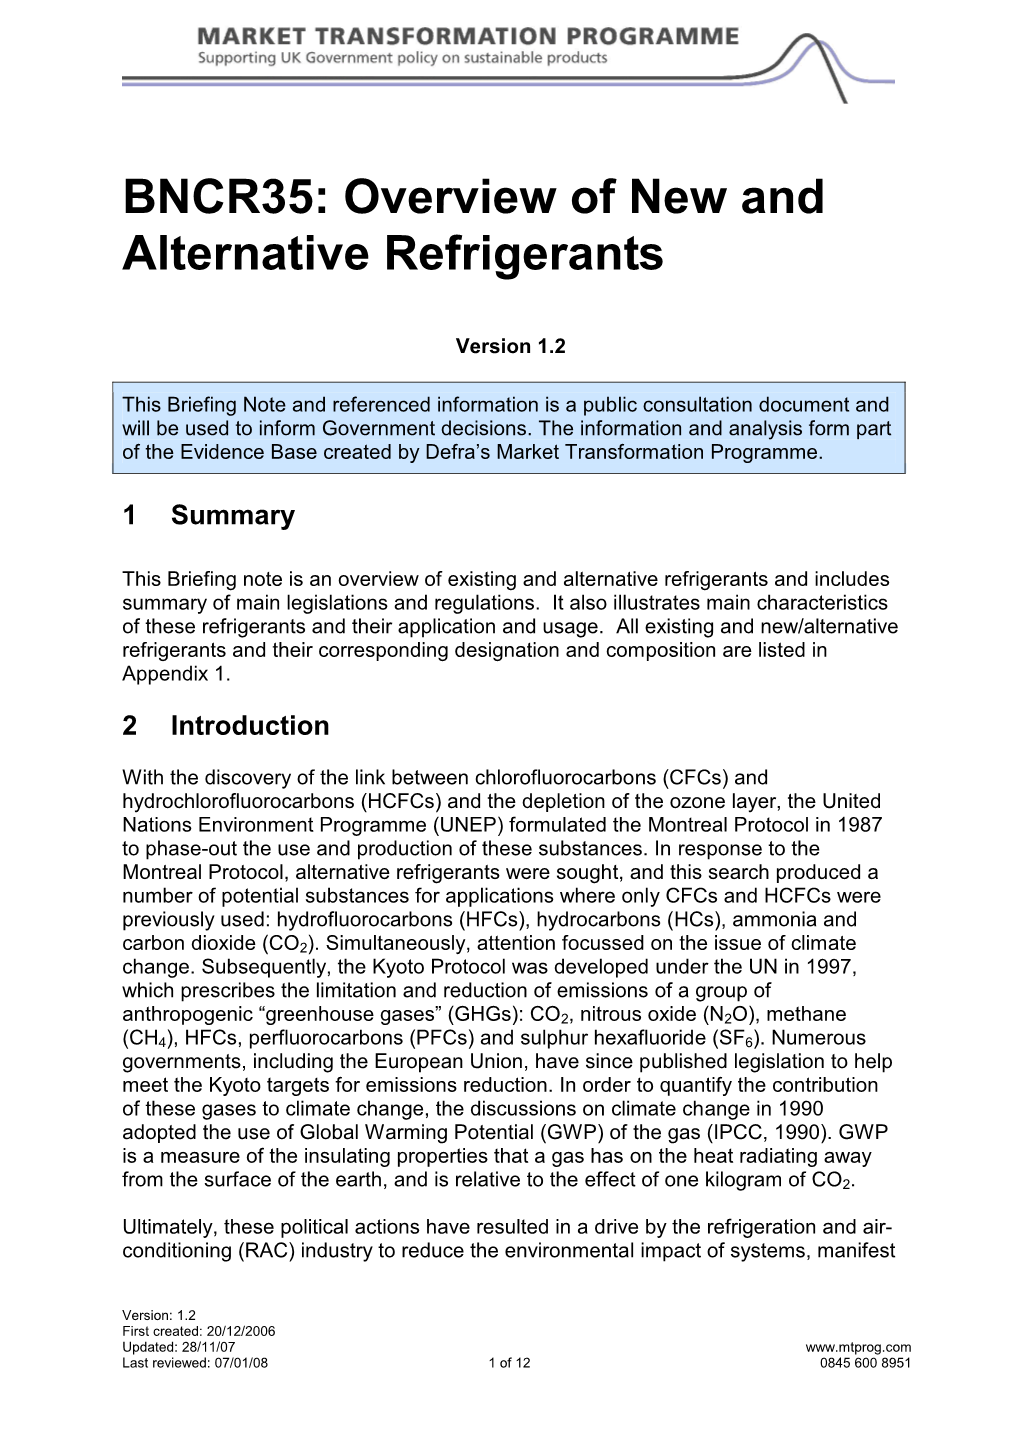 Overview of New and Alternative Refrigerants